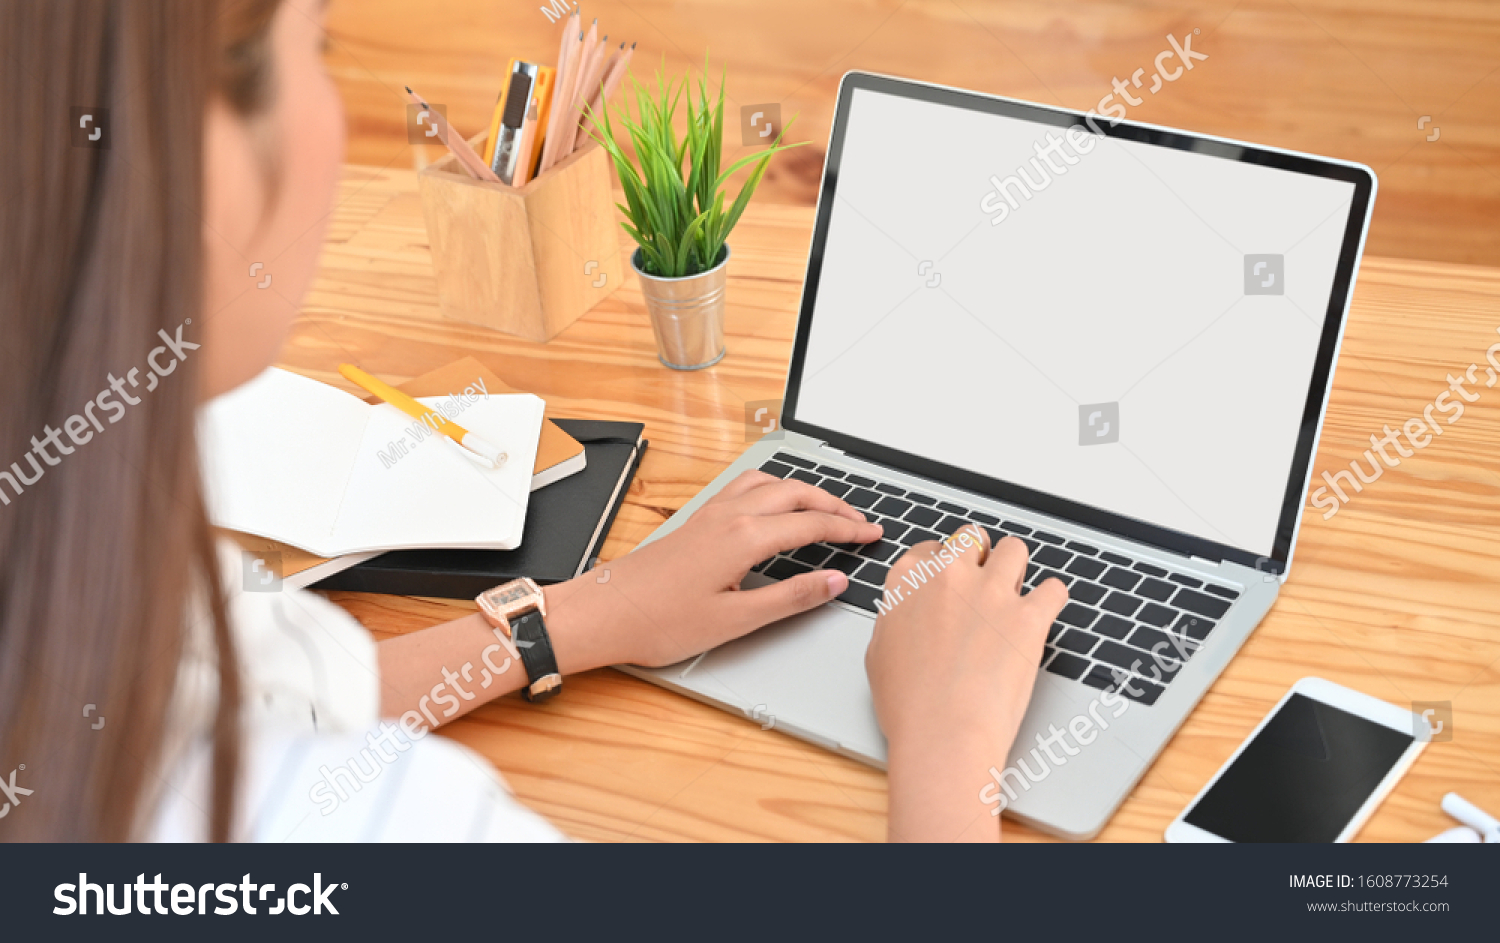 Photo views from back of young woman while using/typing on white blank screen laptop including pencil holder, black blank screen smartphone, potted plant, pencil, notes, earphone on wooden desk. #1608773254